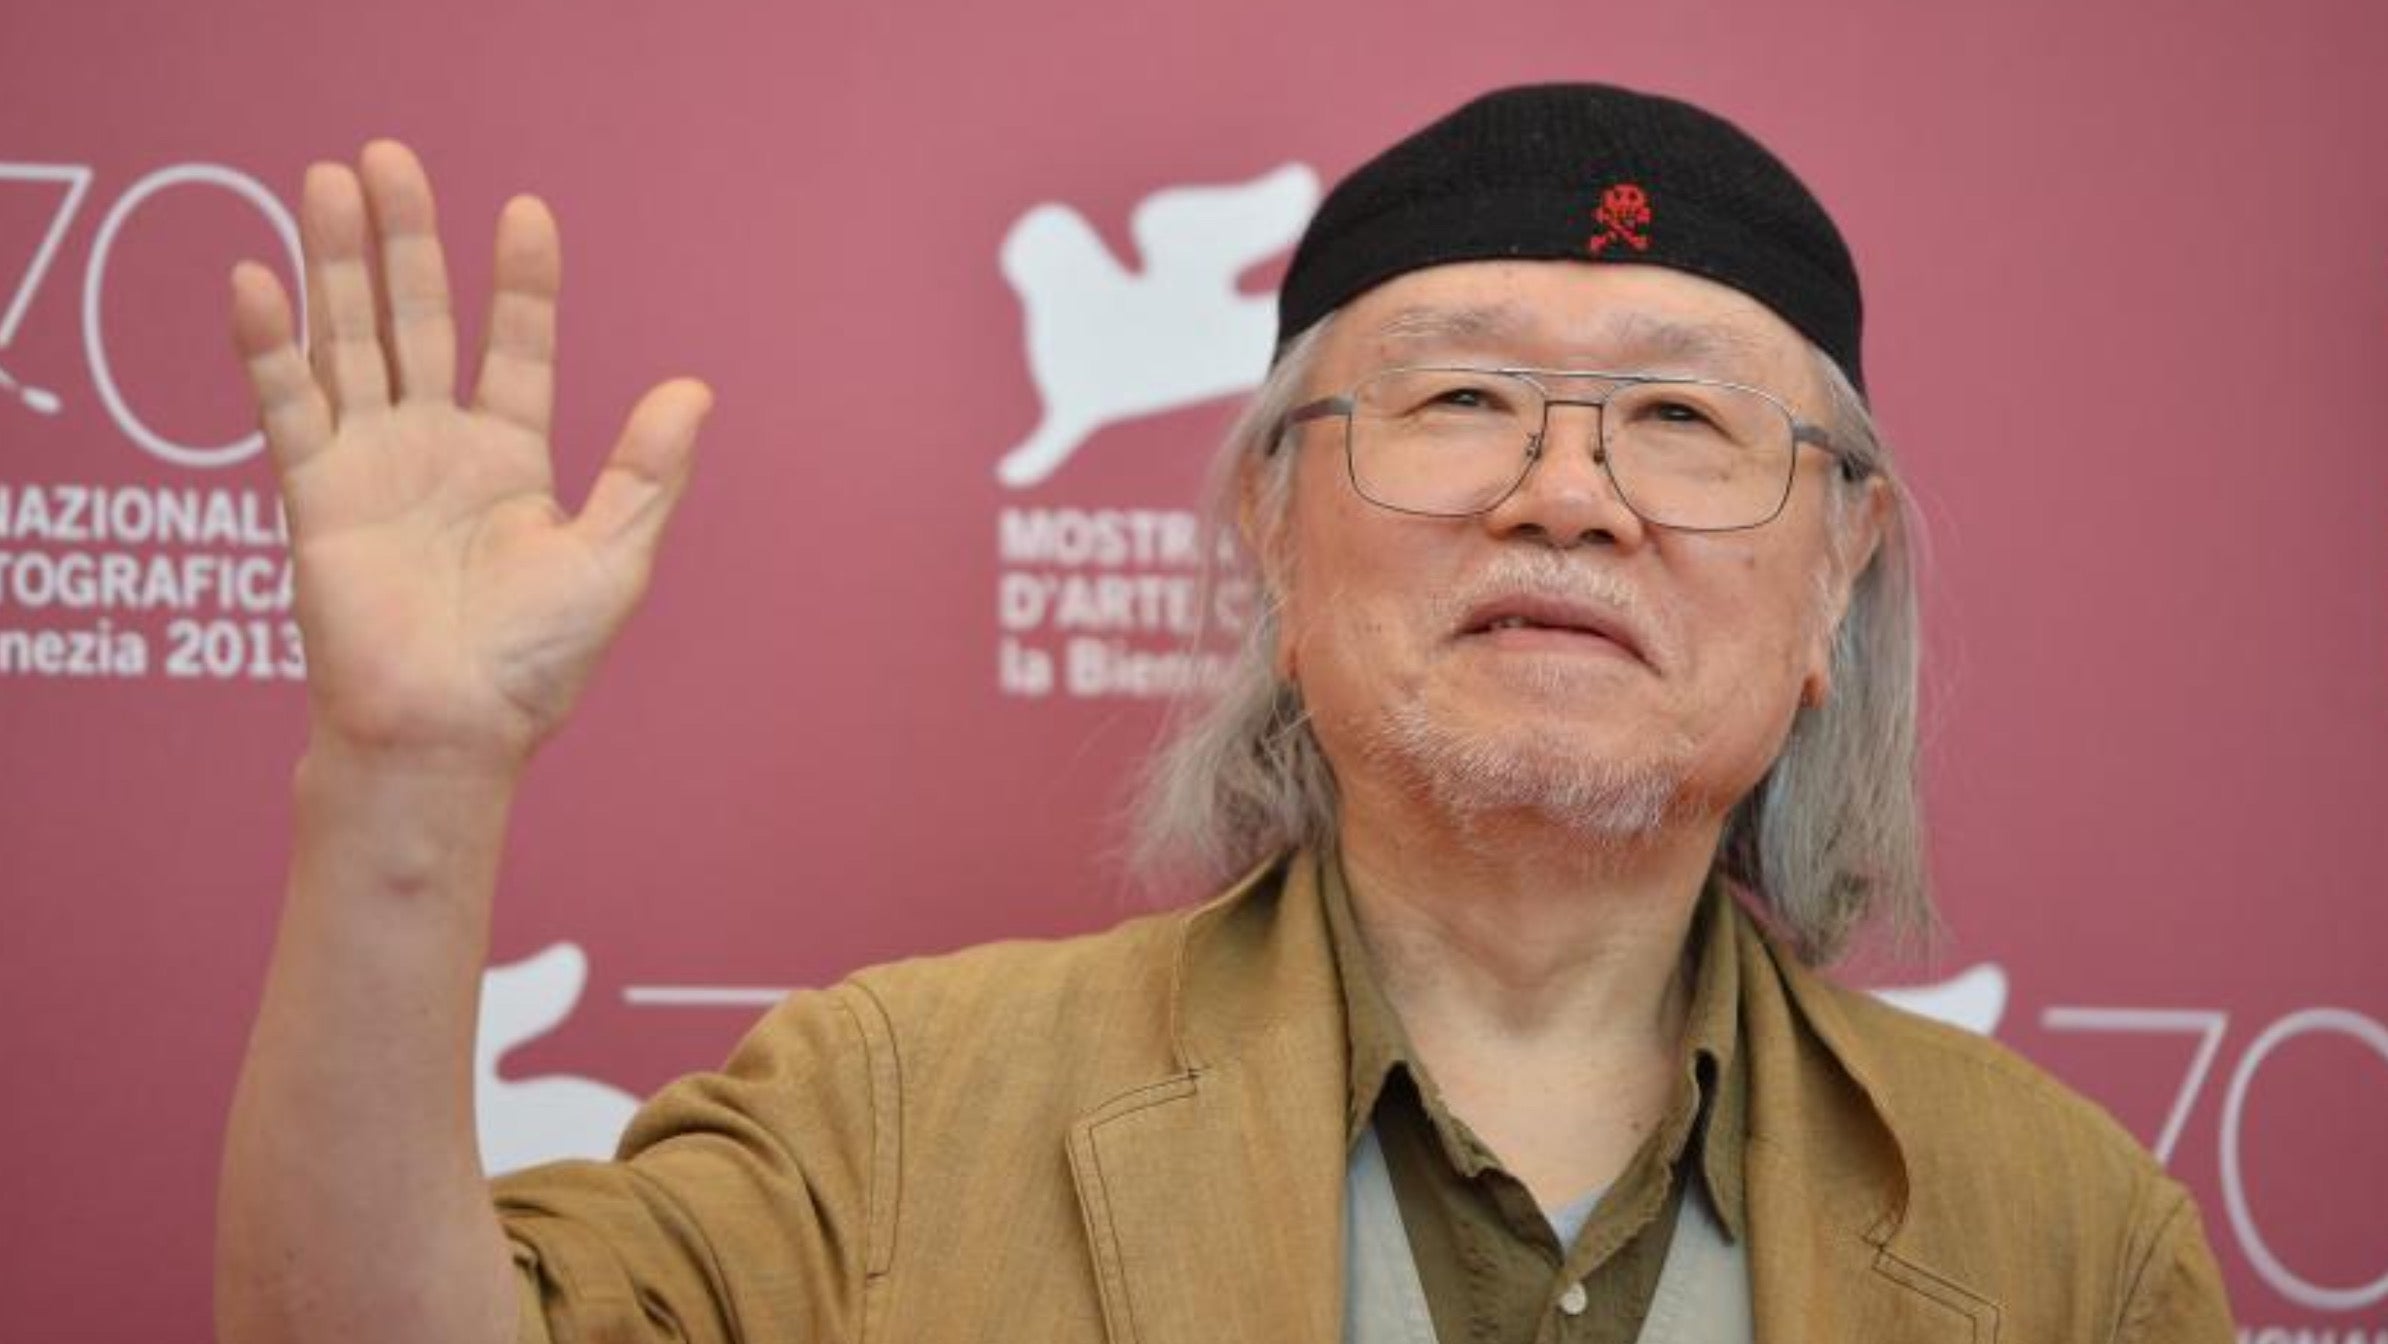 Leiji Matsumoto, manga legend and creator of the Albator series, died at the age of 85, Magnate Daily